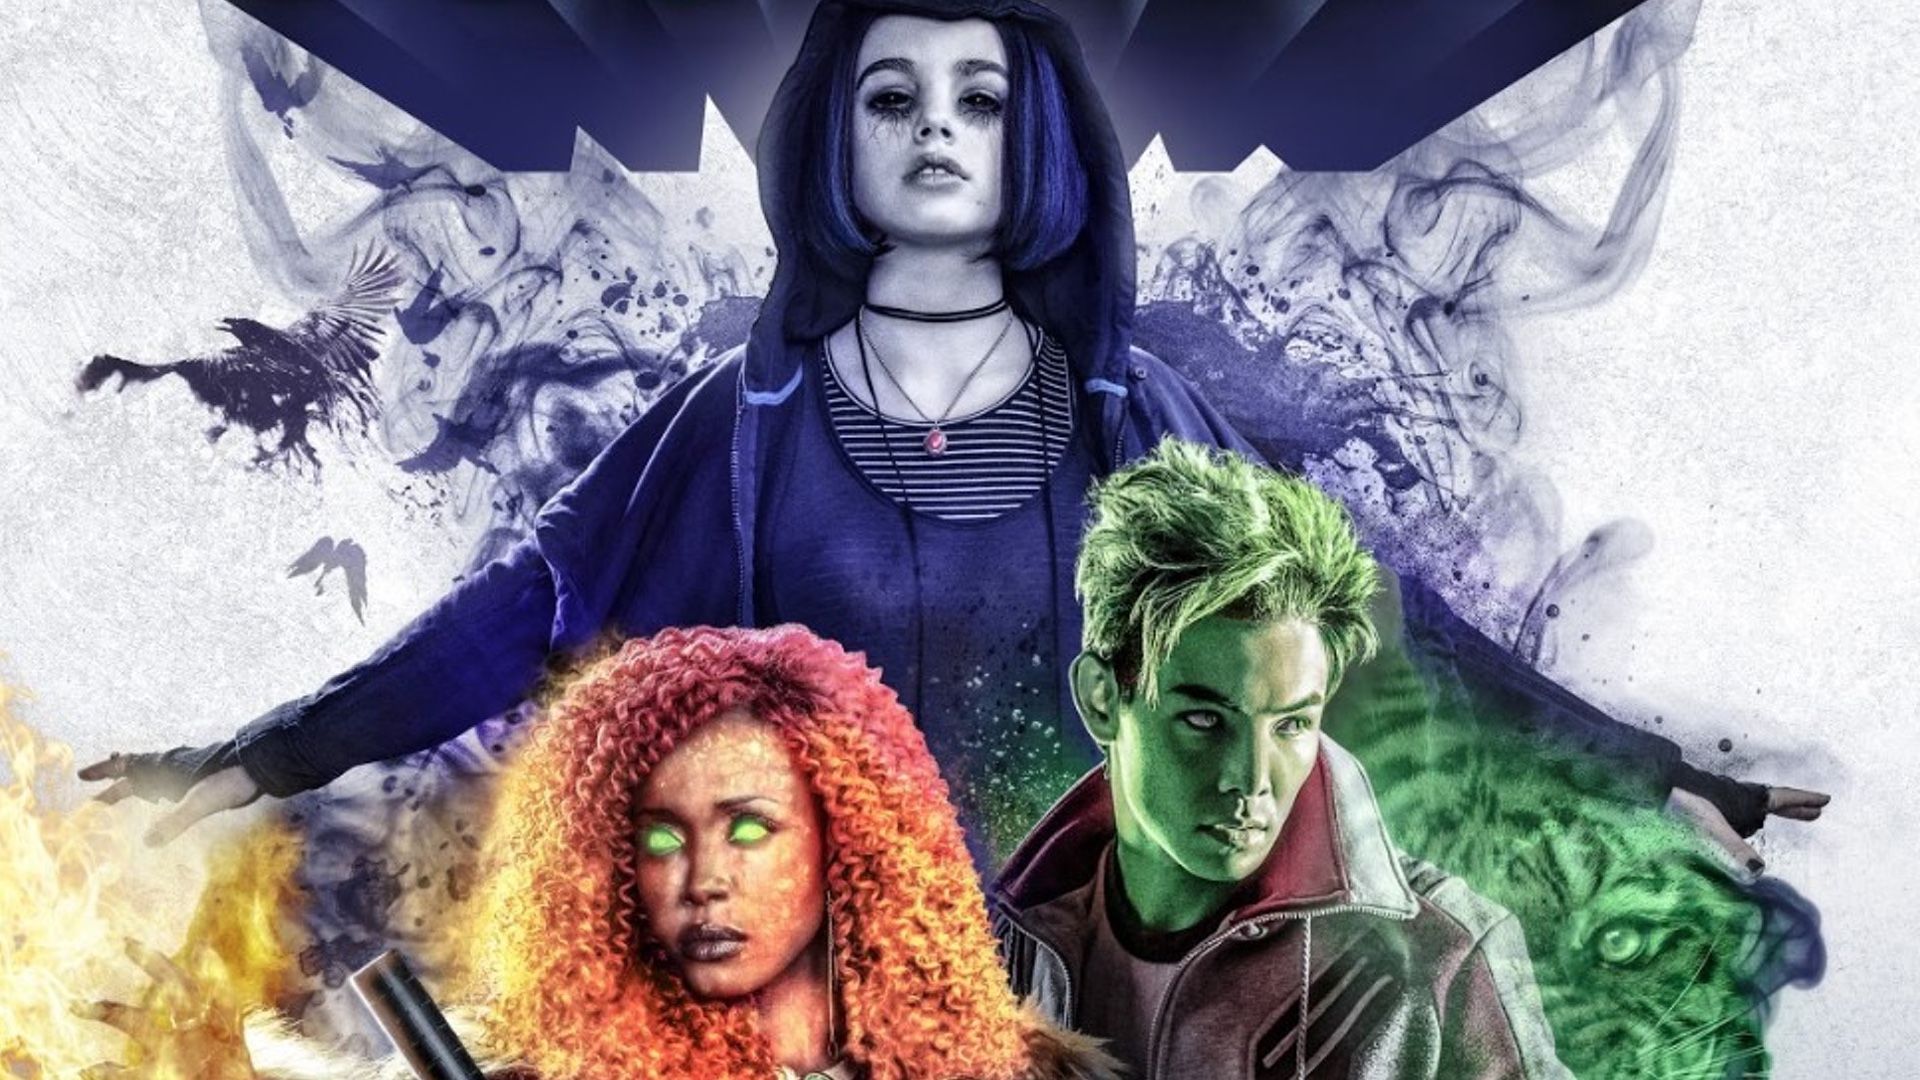 Titans Show Official Poster Wallpapers